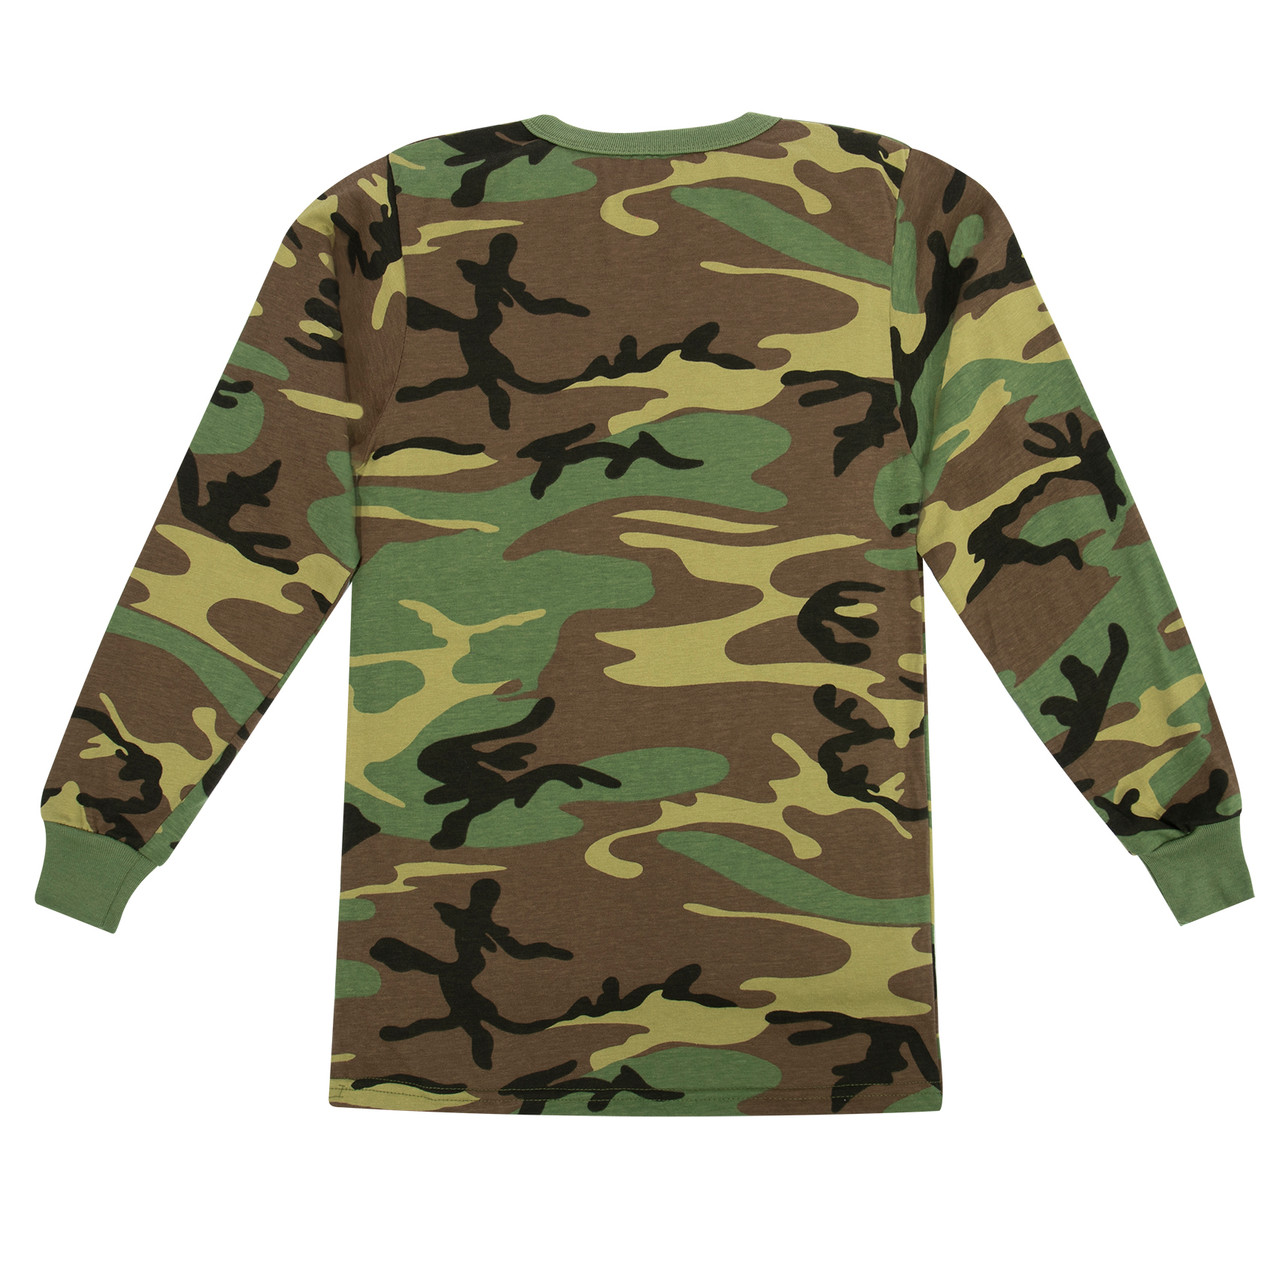 Kids Camo Long Sleeve T-Shirt Military Camouflage Tactical Boys